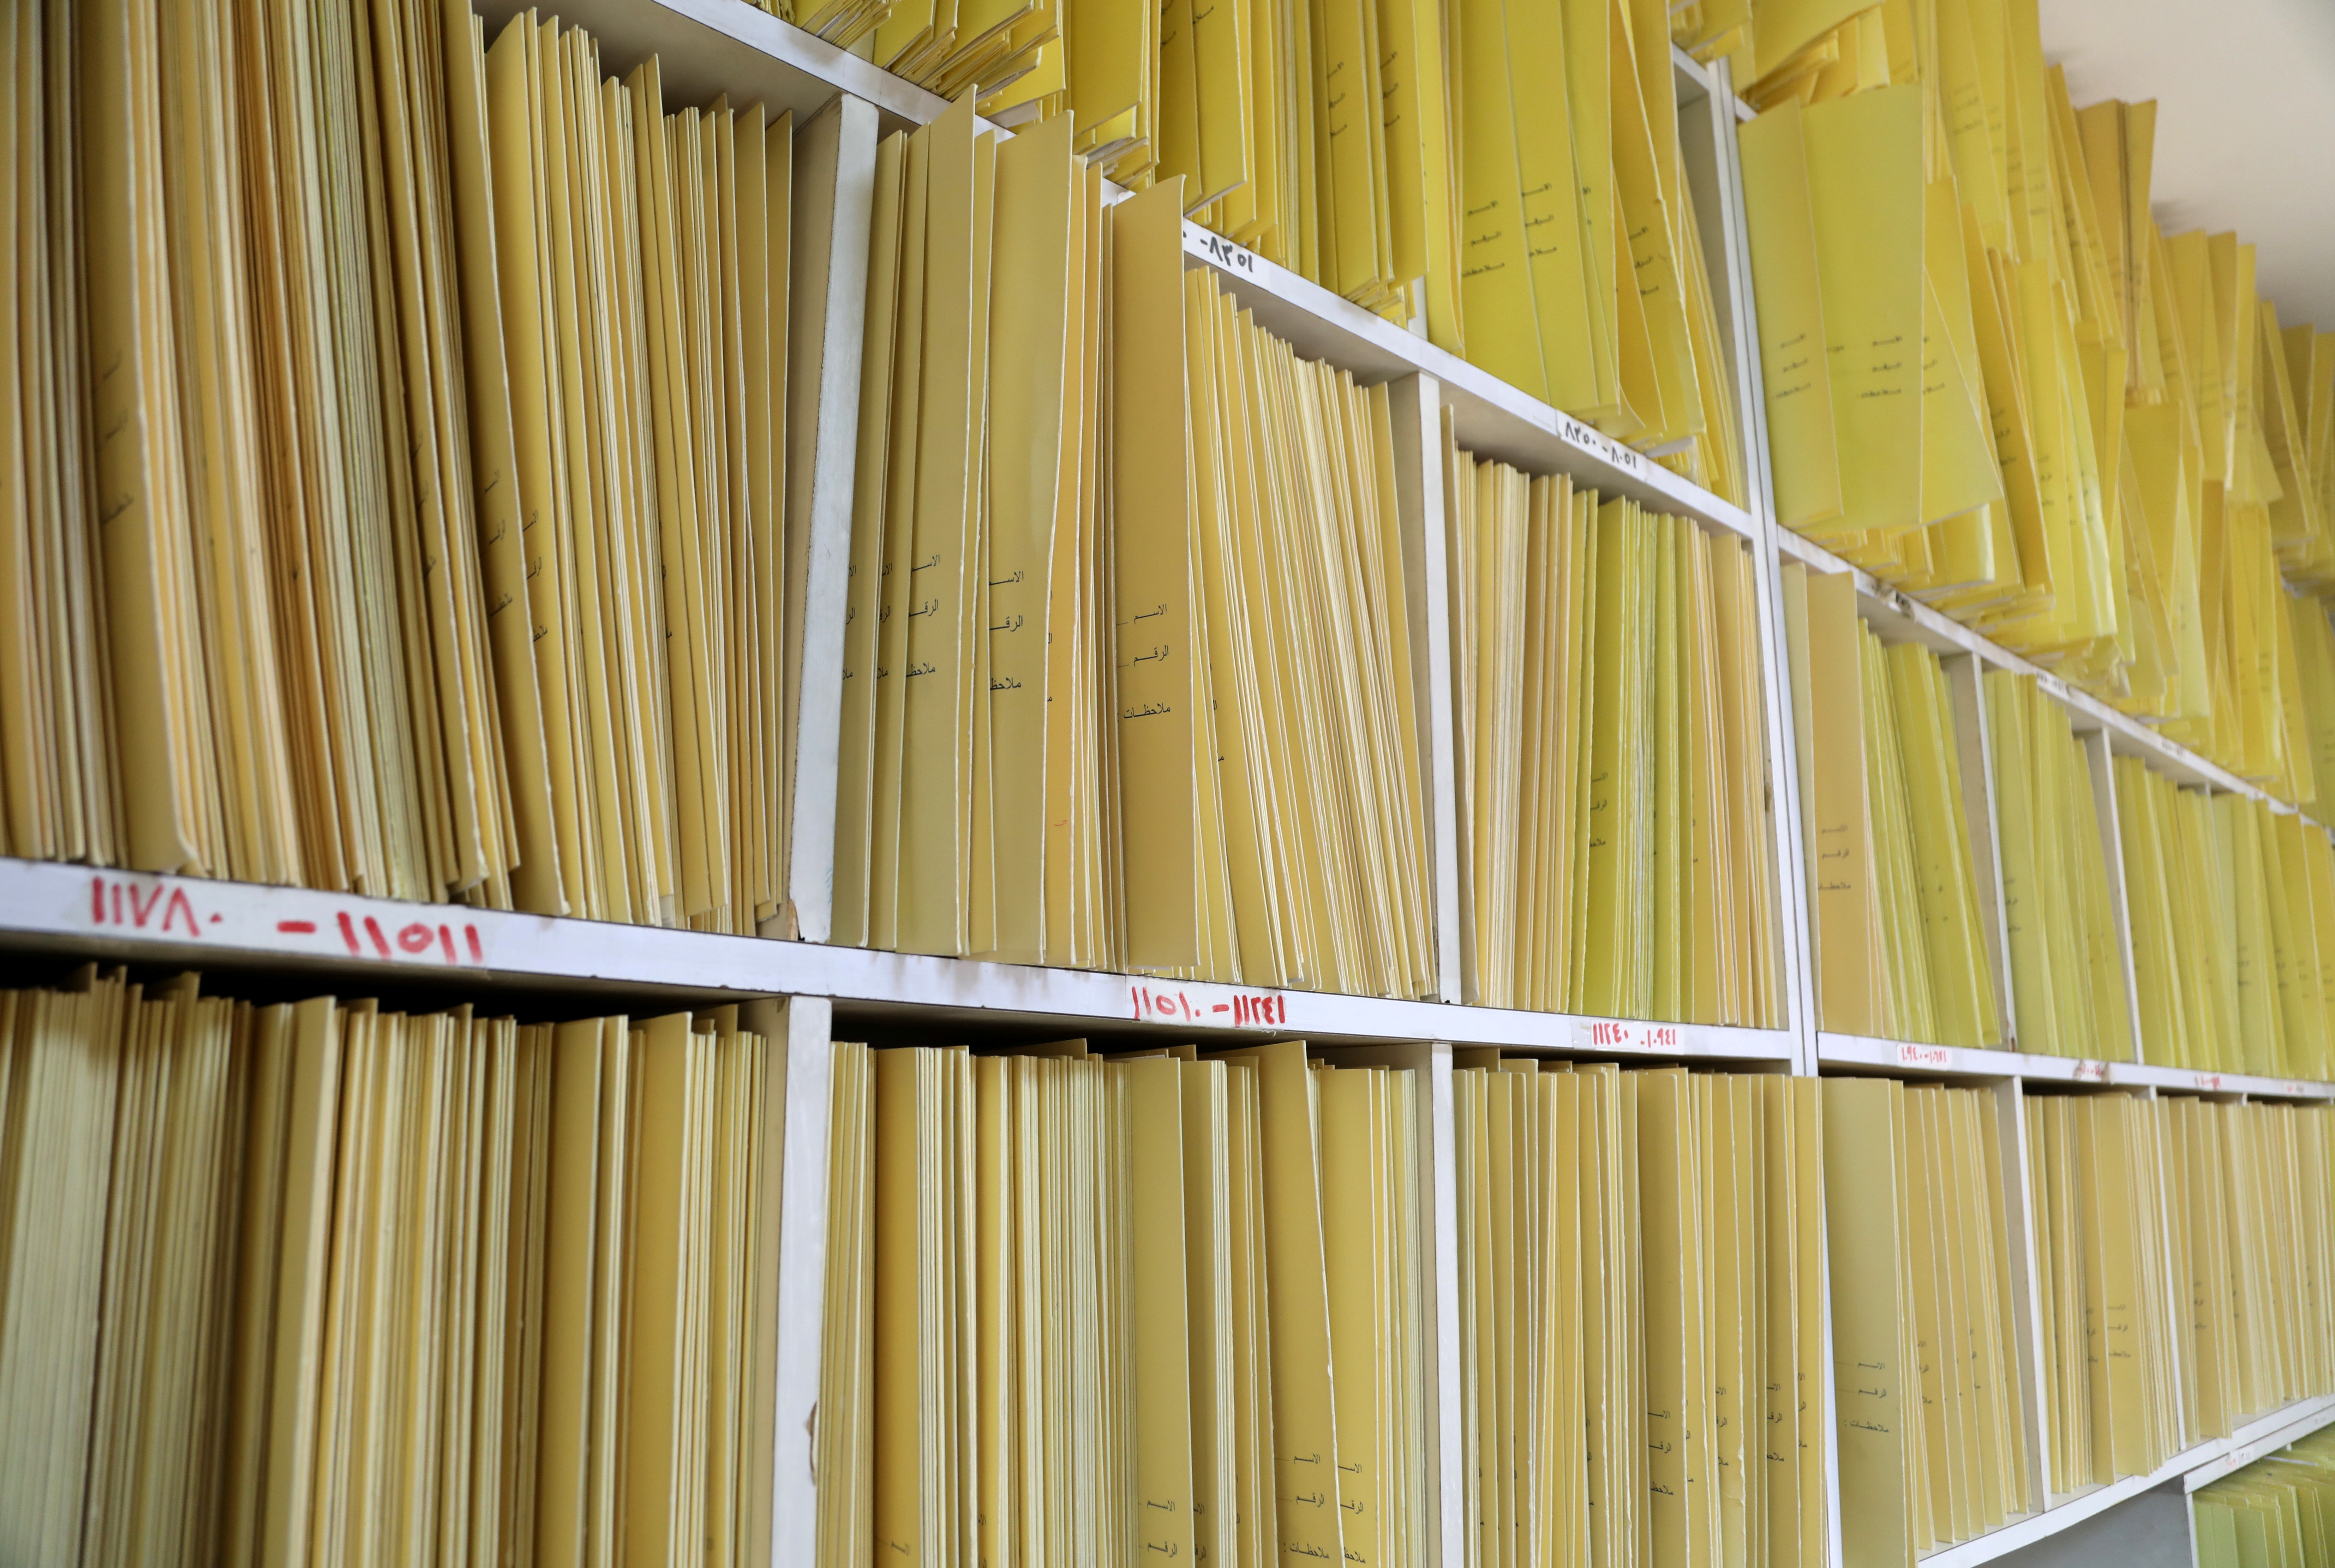 Medical records of patients are stored on shelves inside the clinic of psychiatrist, Walid Sarhan, in Amman, Jordan May 31, 2021. Picture taken May 31, 2021. REUTERS/Alaa Al Sukhni